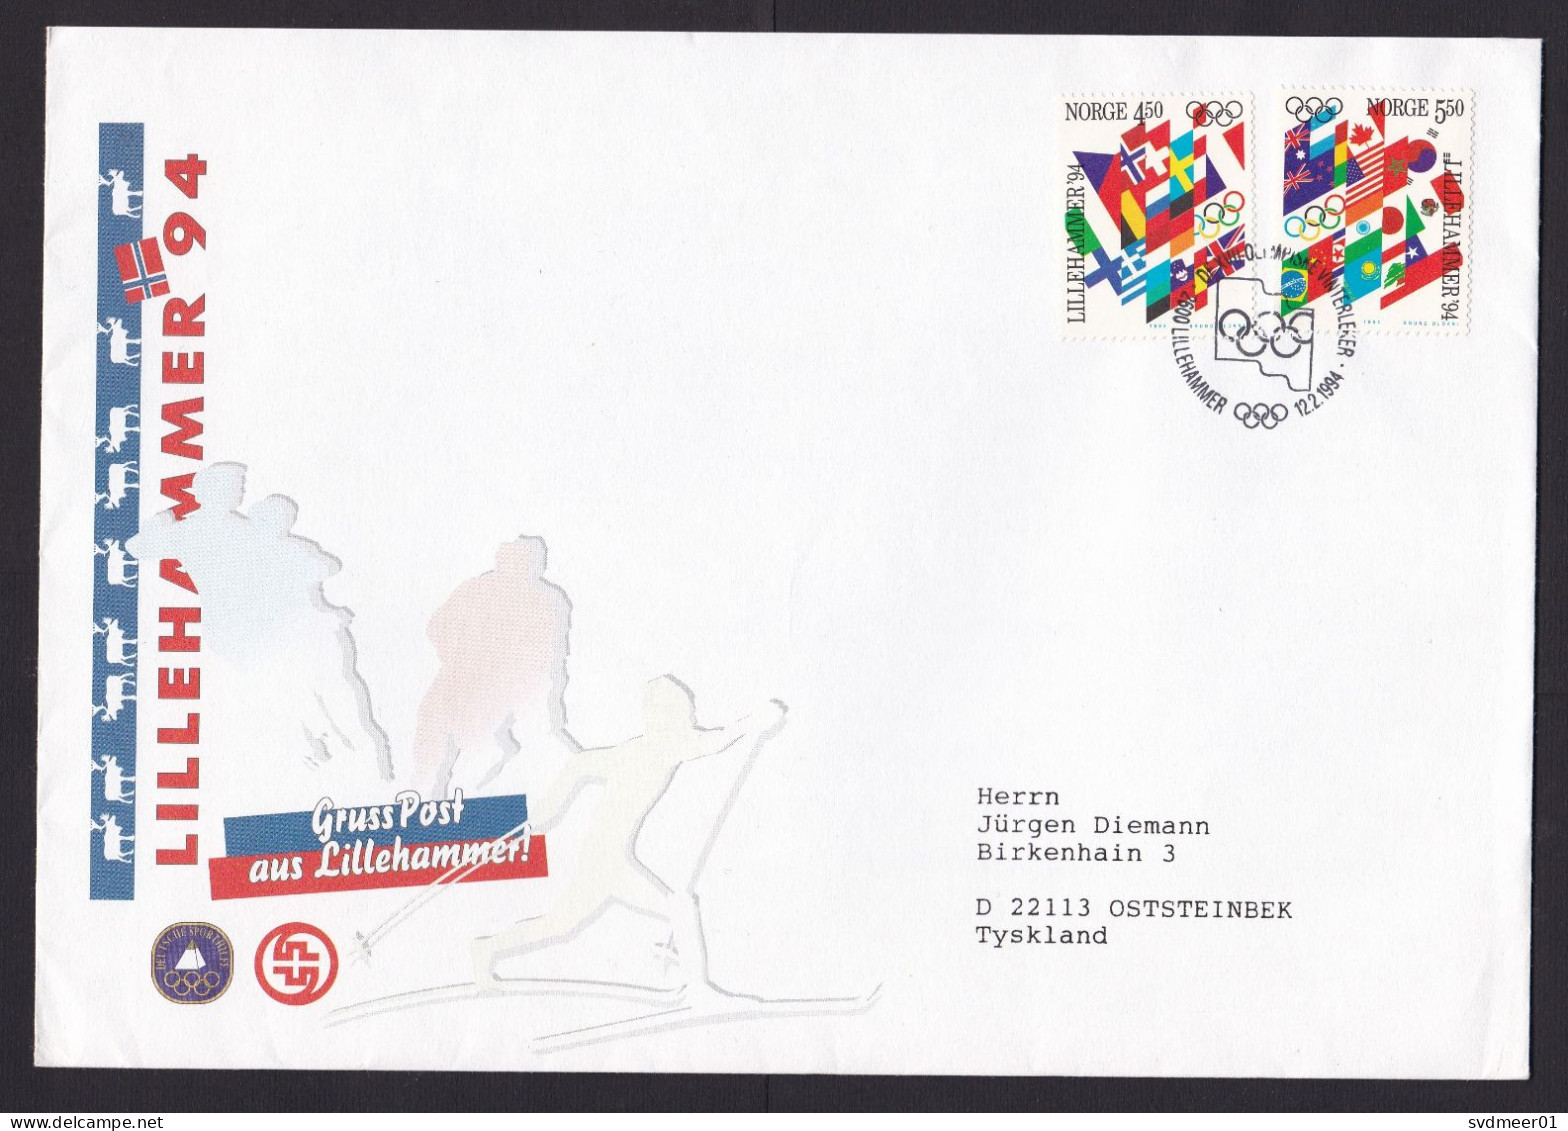 Norway: Cover To Gerrmany, 1994, 2 Stamps, Olympics Lillehammer, Picture Cards German Sporters Enclosed (traces Of Use) - Lettres & Documents